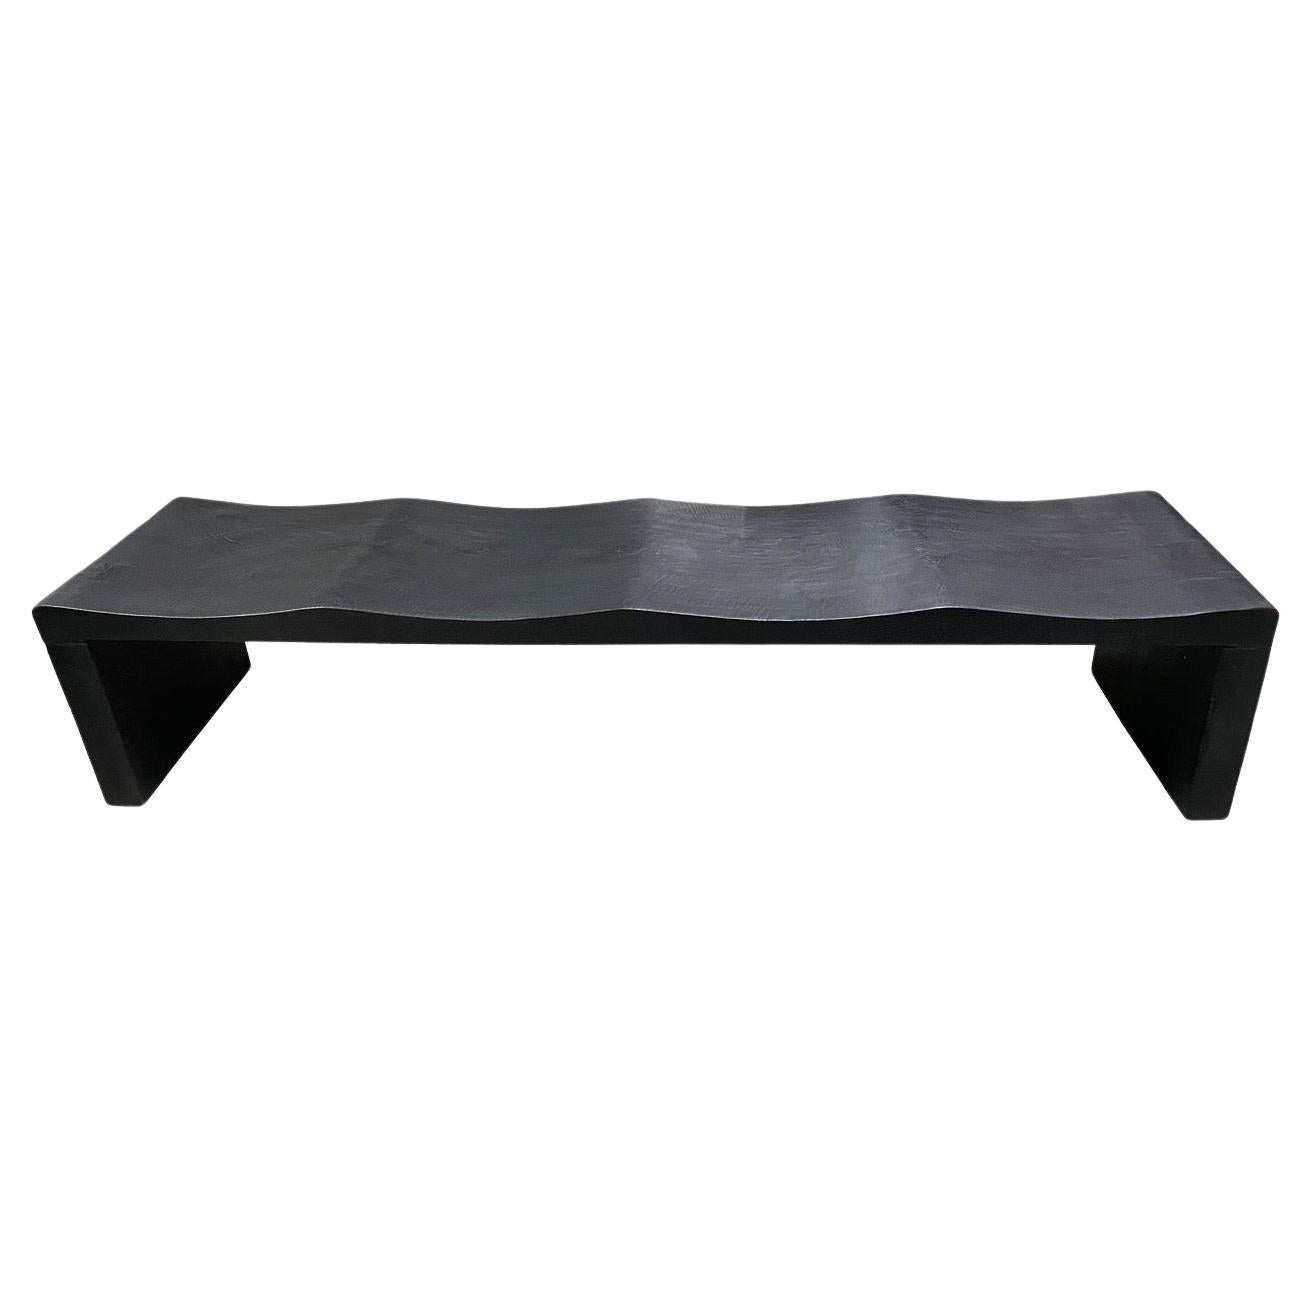 Andrianna Shamaris Impressive Long Charred Wave Bench For Sale